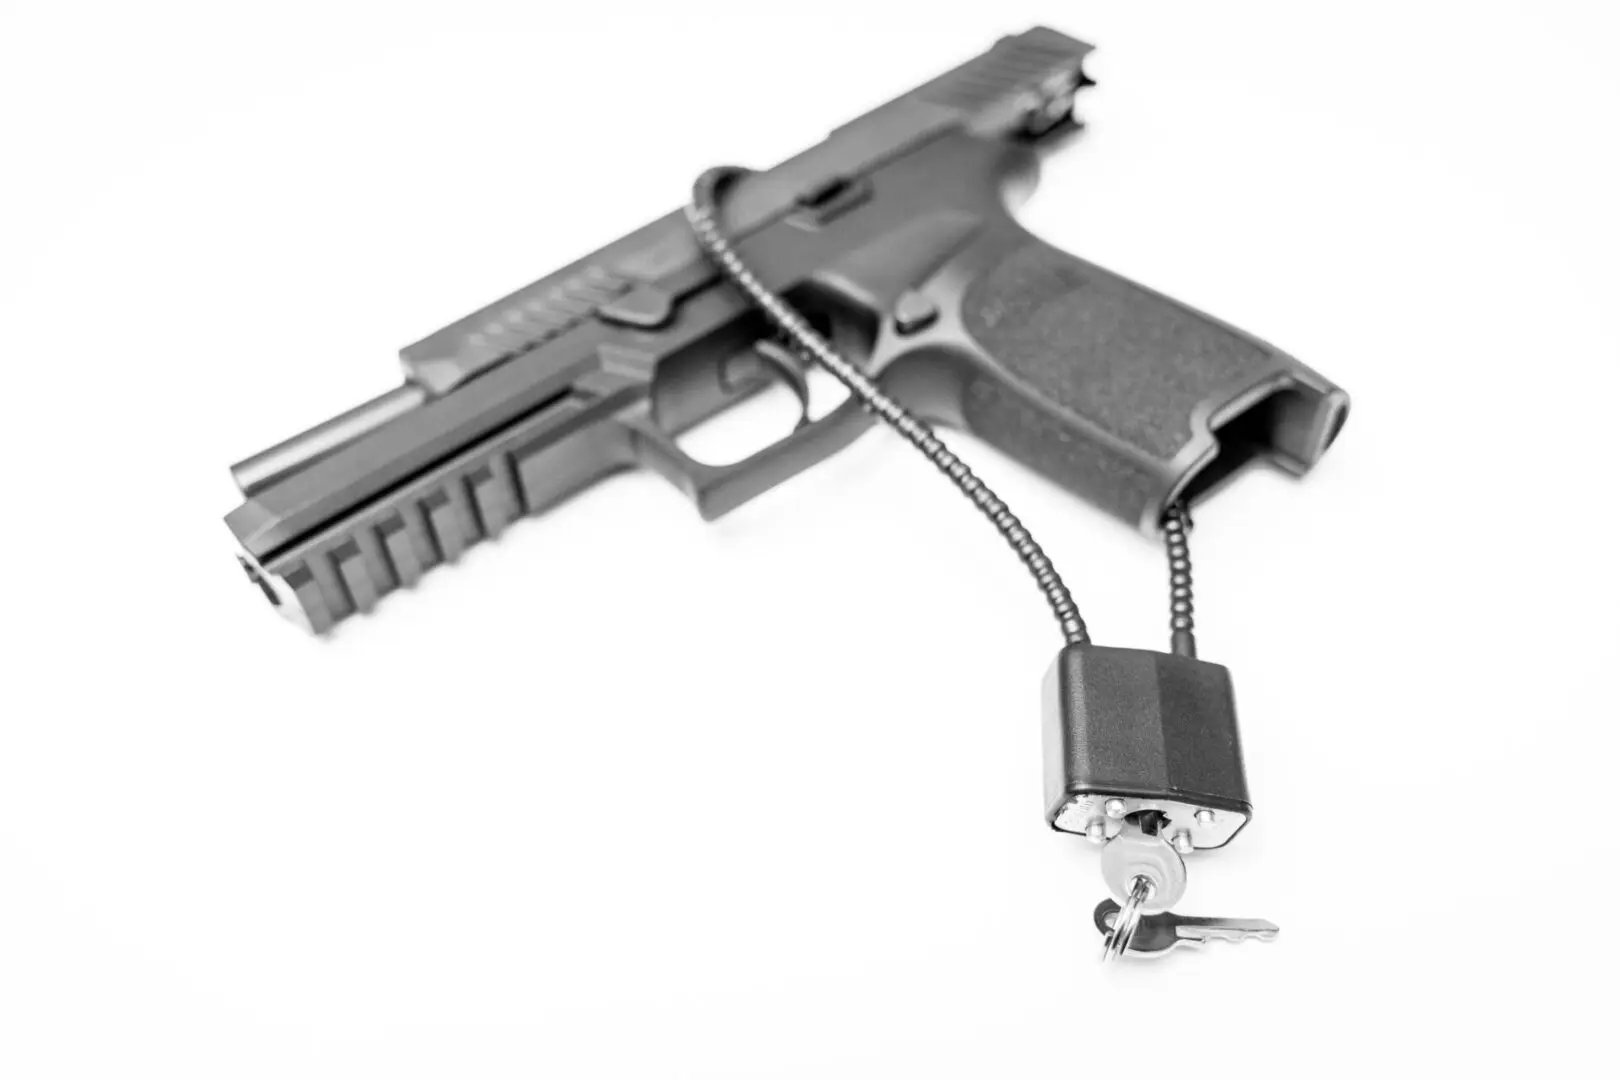 Locked disarmed and secured handgun on isolated white background